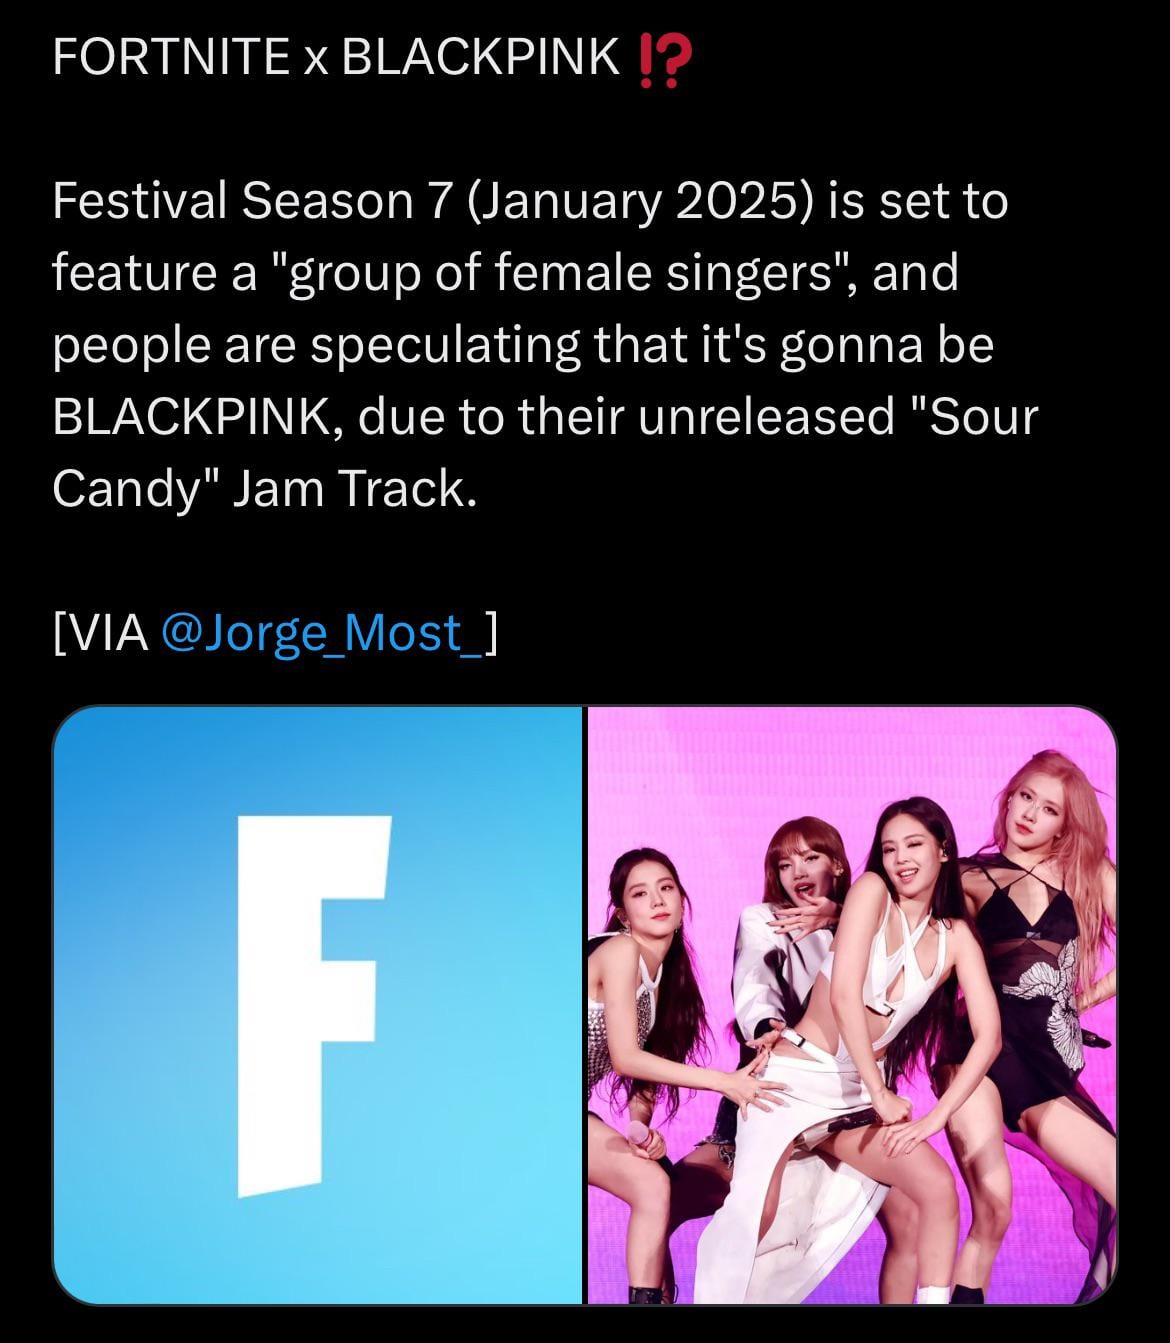 240710 - BLACKPINK is the possible headliner for the Fortnite Festival game mode season in late ‘24/early ‘25.